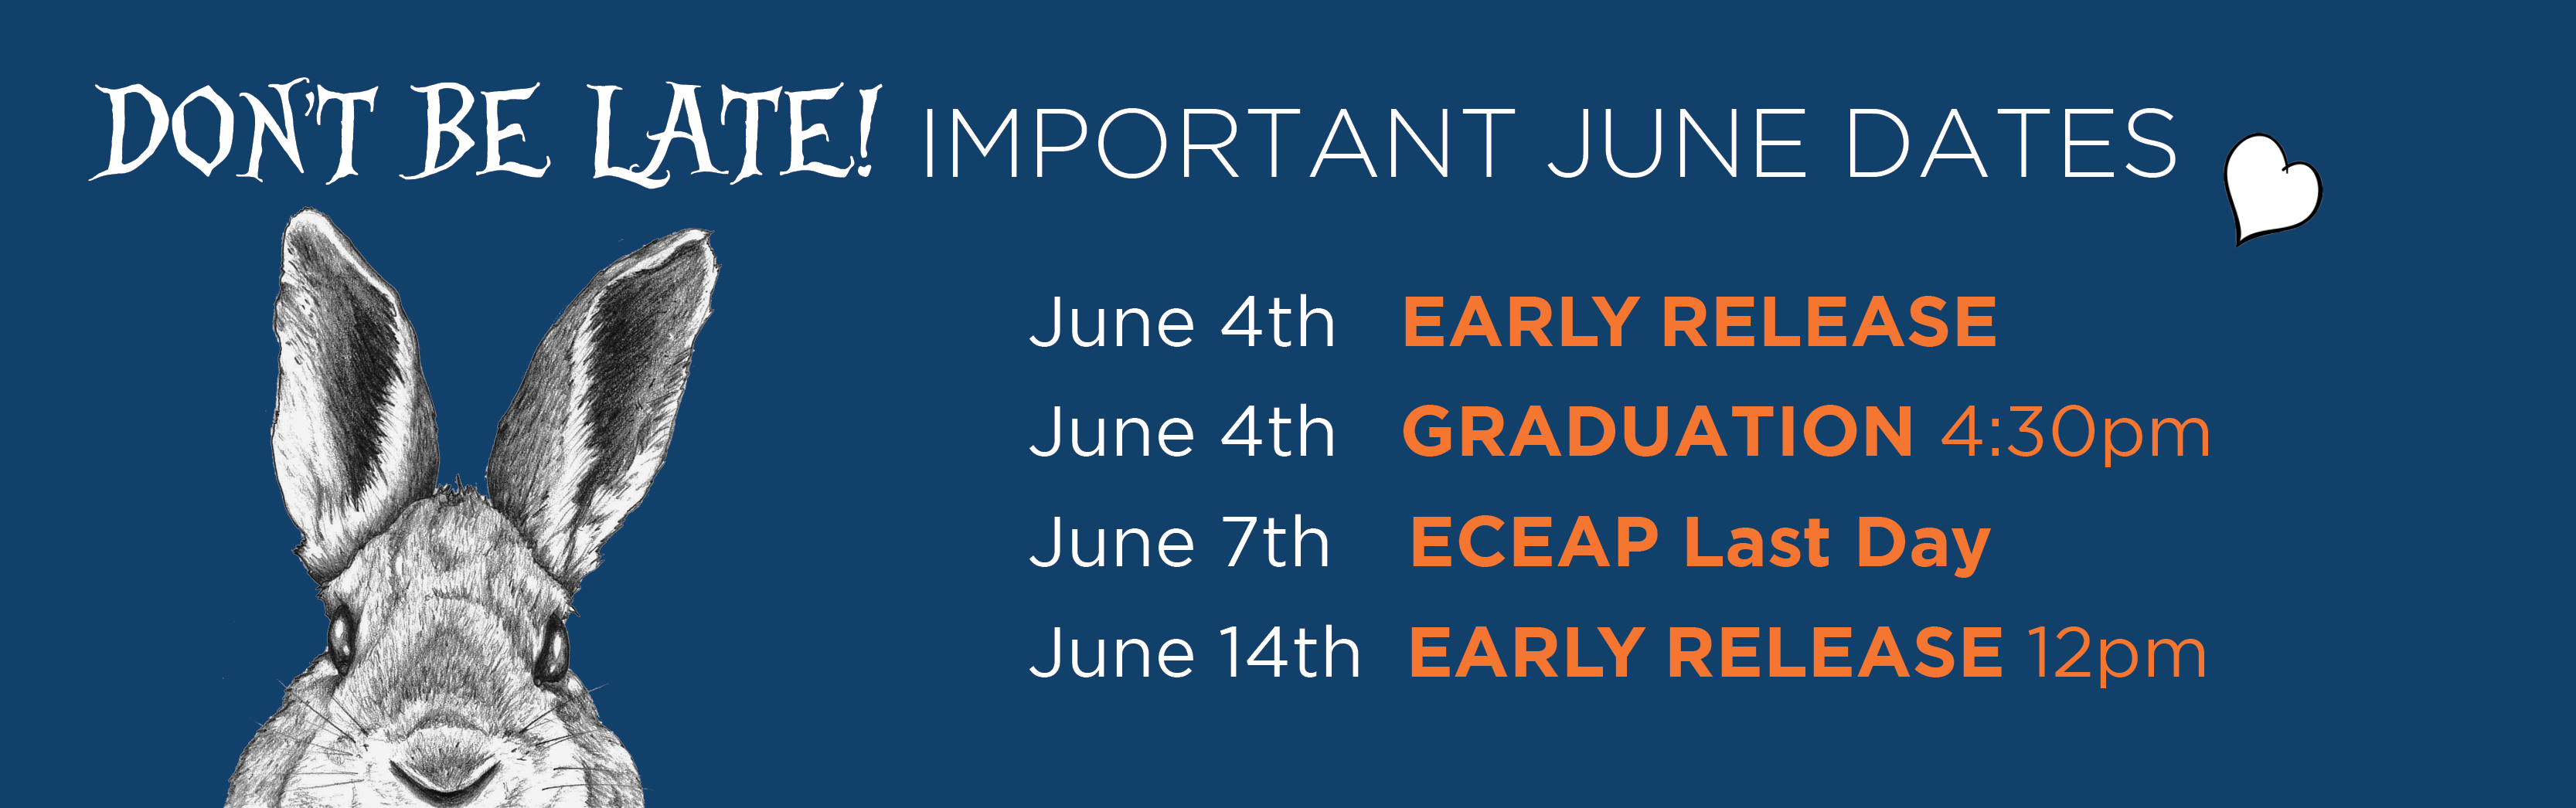 Important dates for June